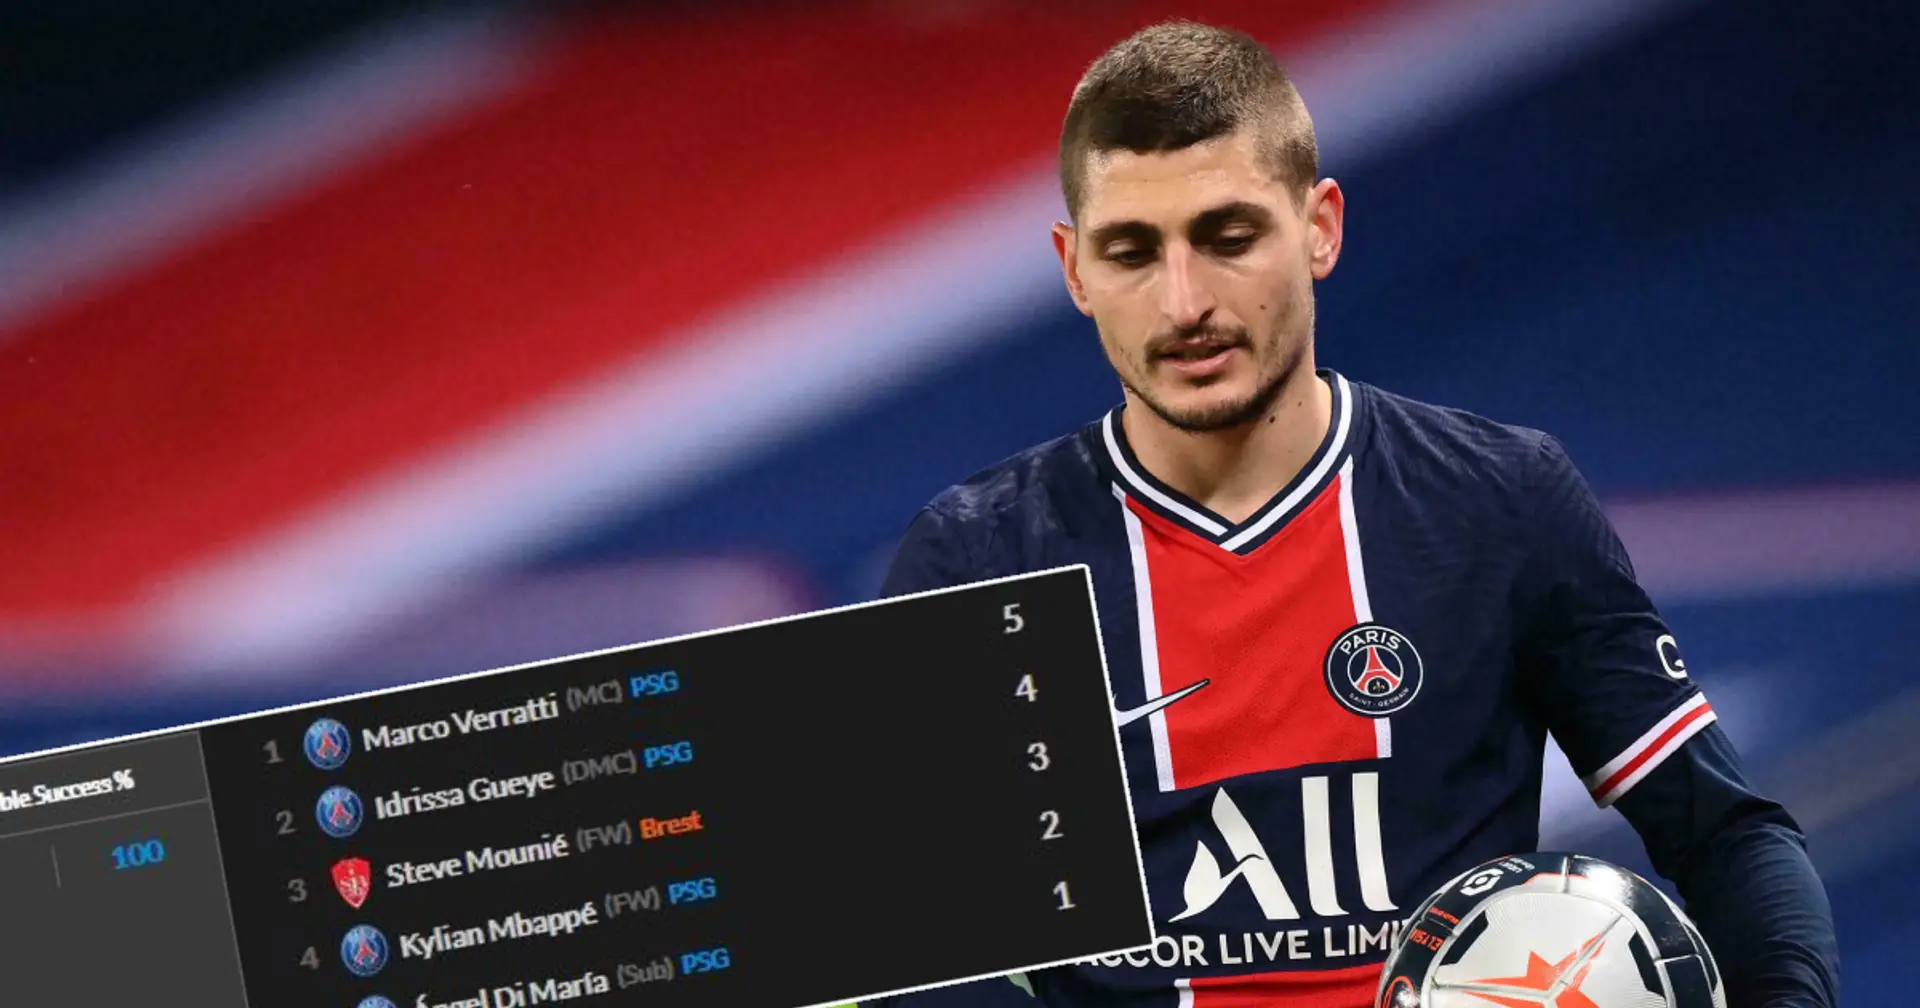 Marco Verratti's montrous stats in just 70 minutes against Brest